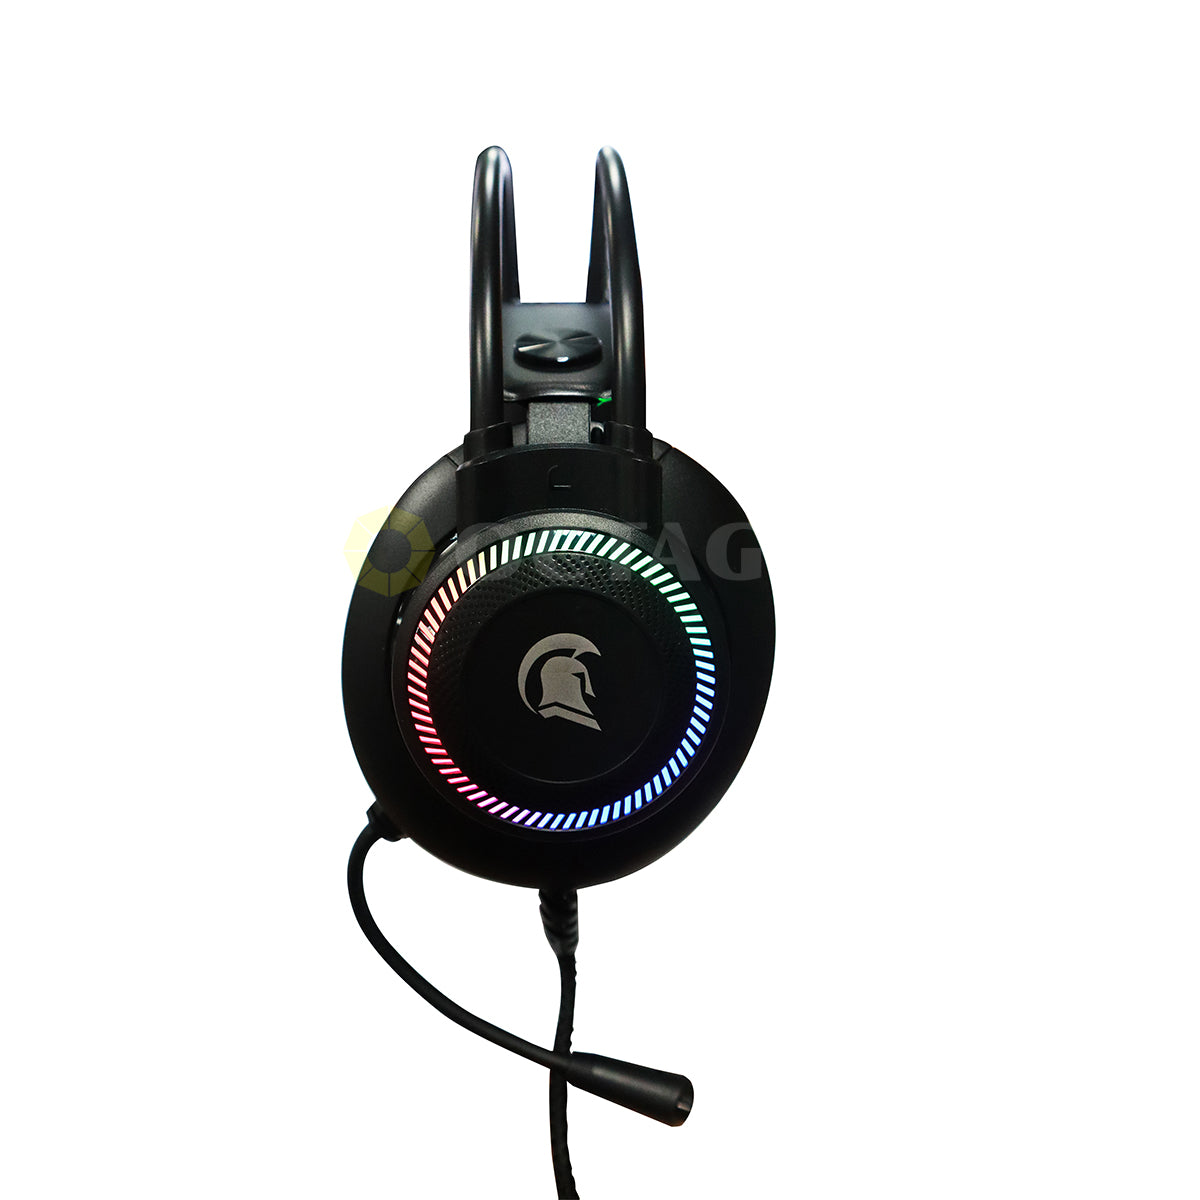 Titan Wired LED Gaming Headset